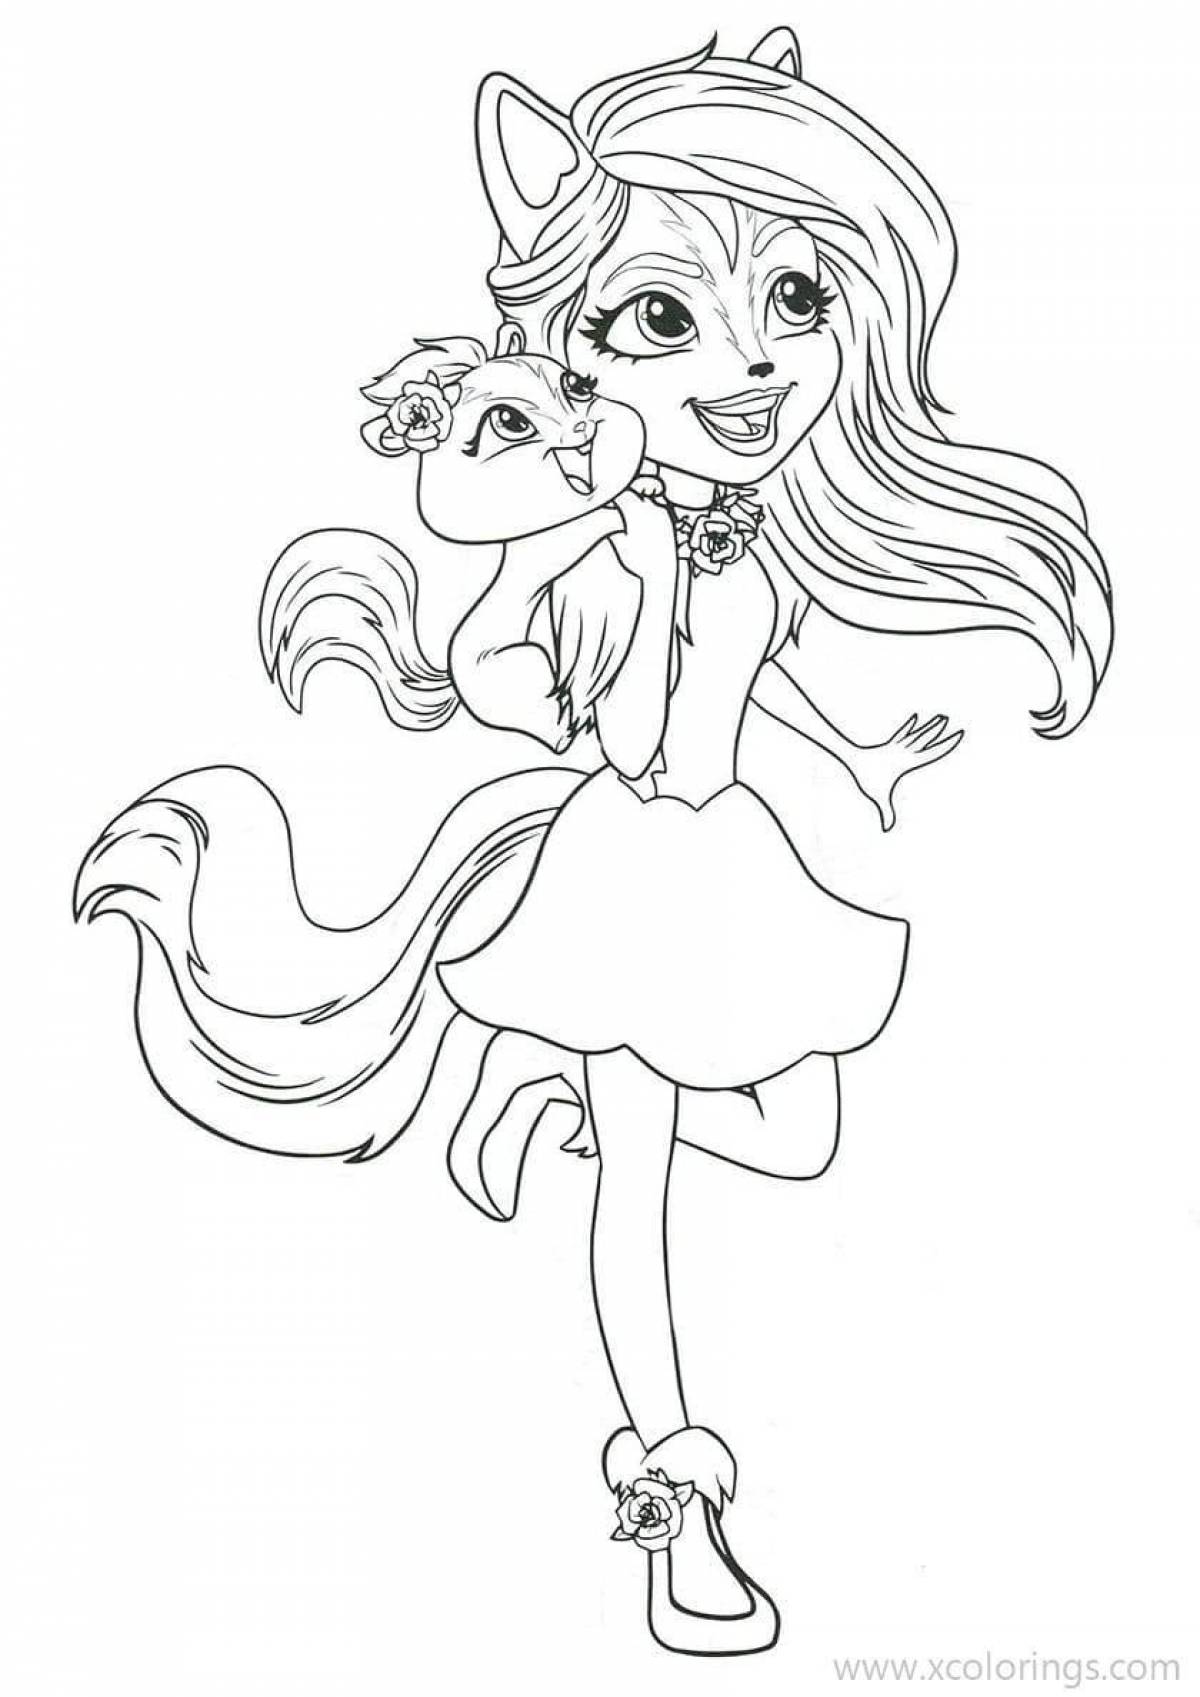 Magnificent enchantimals coloring pages for kids